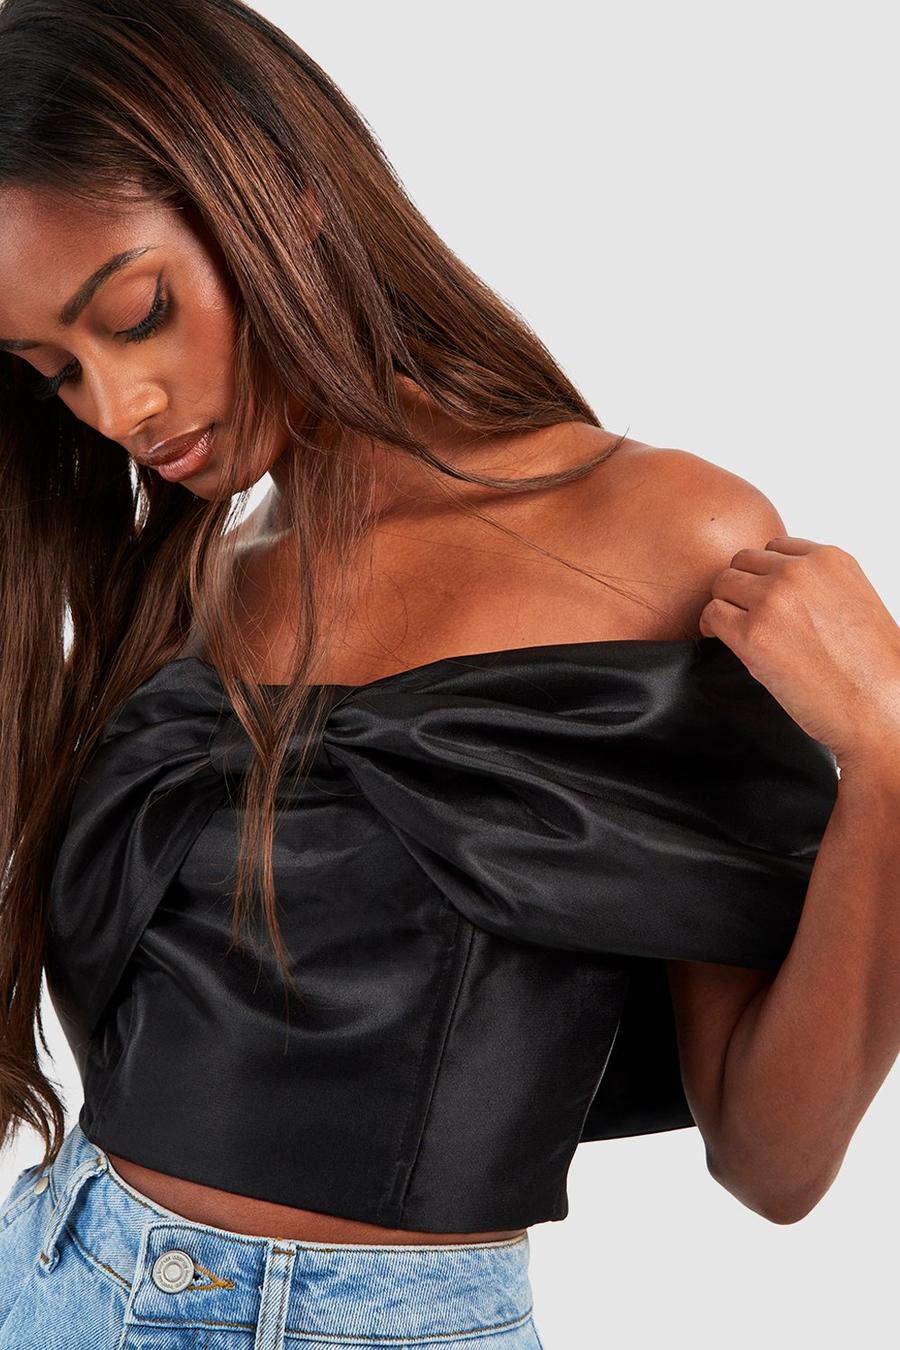 Corset Tops Are Set to Be the Silhouette of Summer